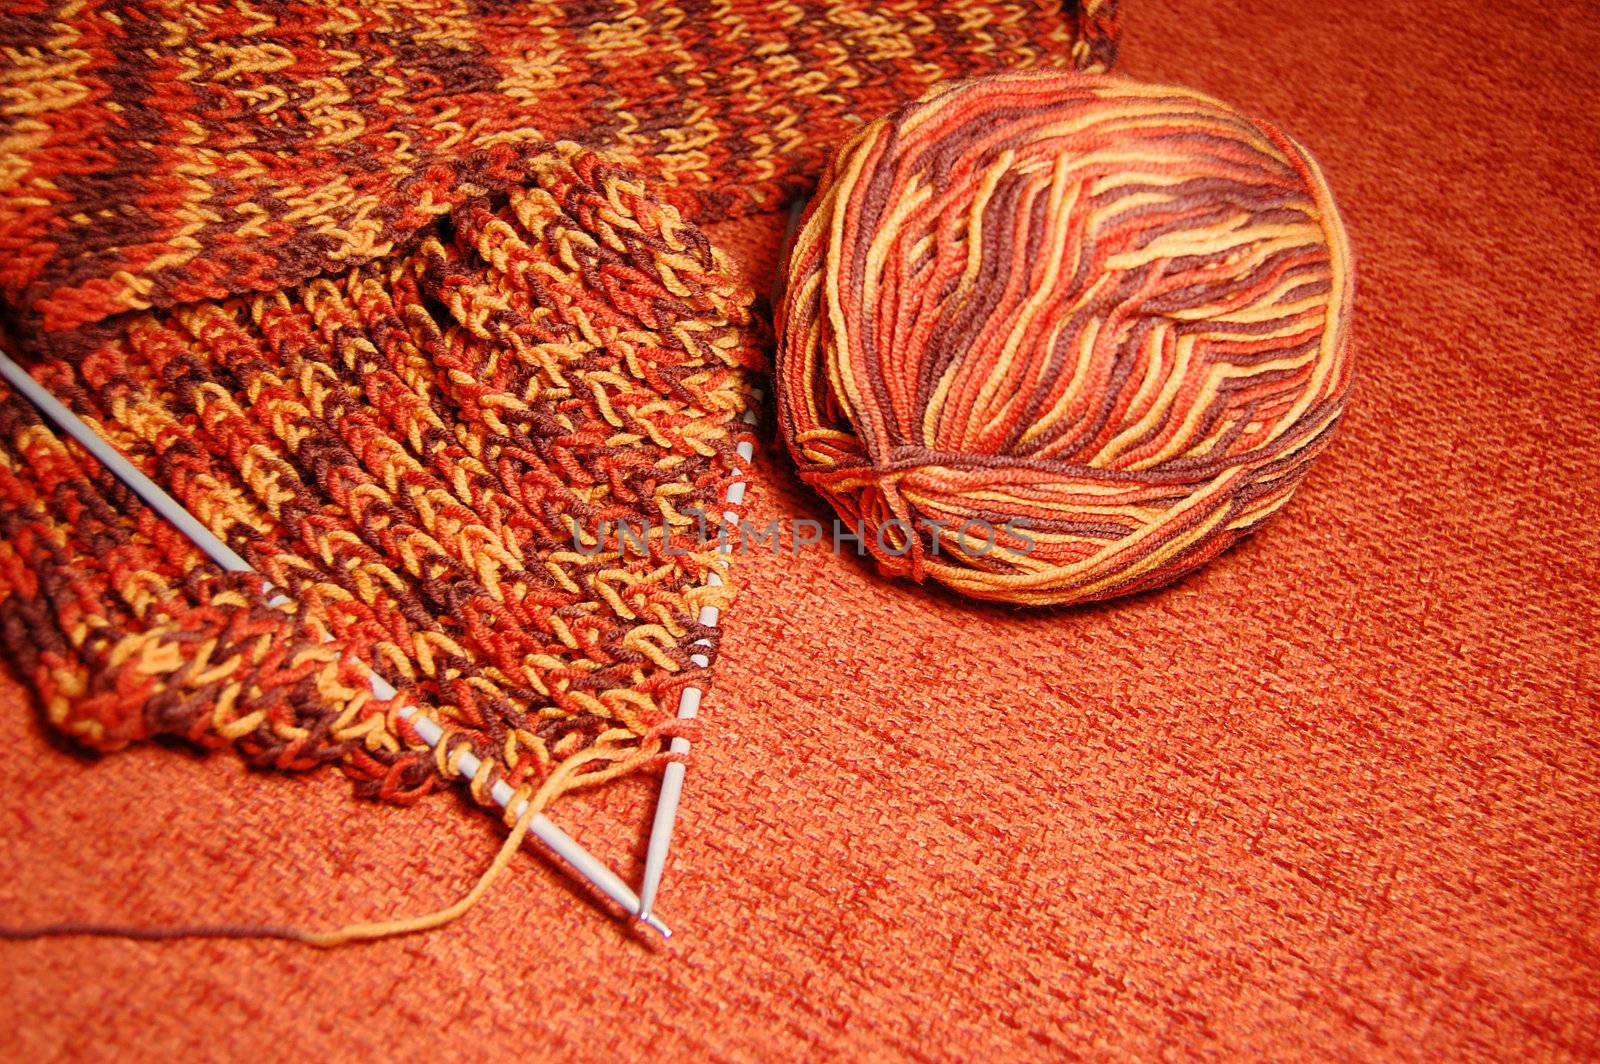 Knitting scarf from yarn with needles